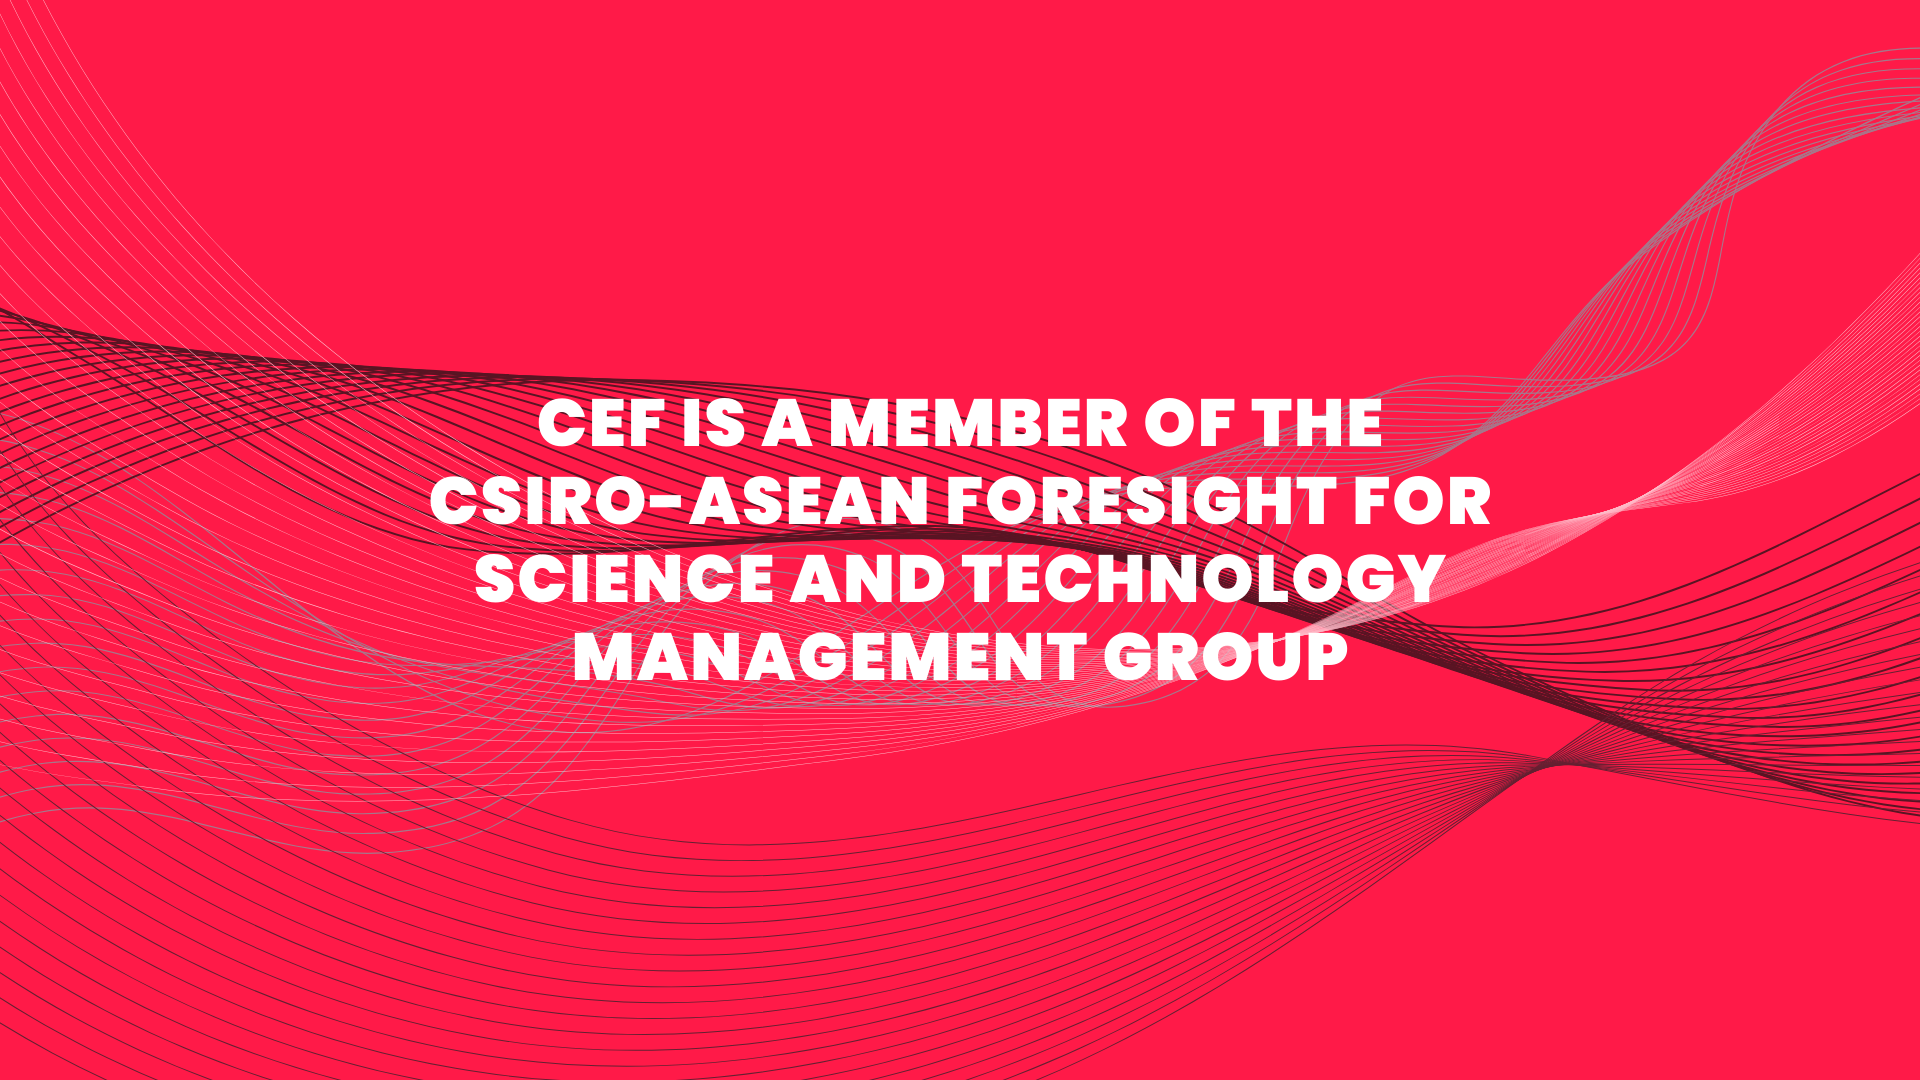 CEF is a Member of the CSIRO-ASEAN Foresight for Science and Technology Management Group